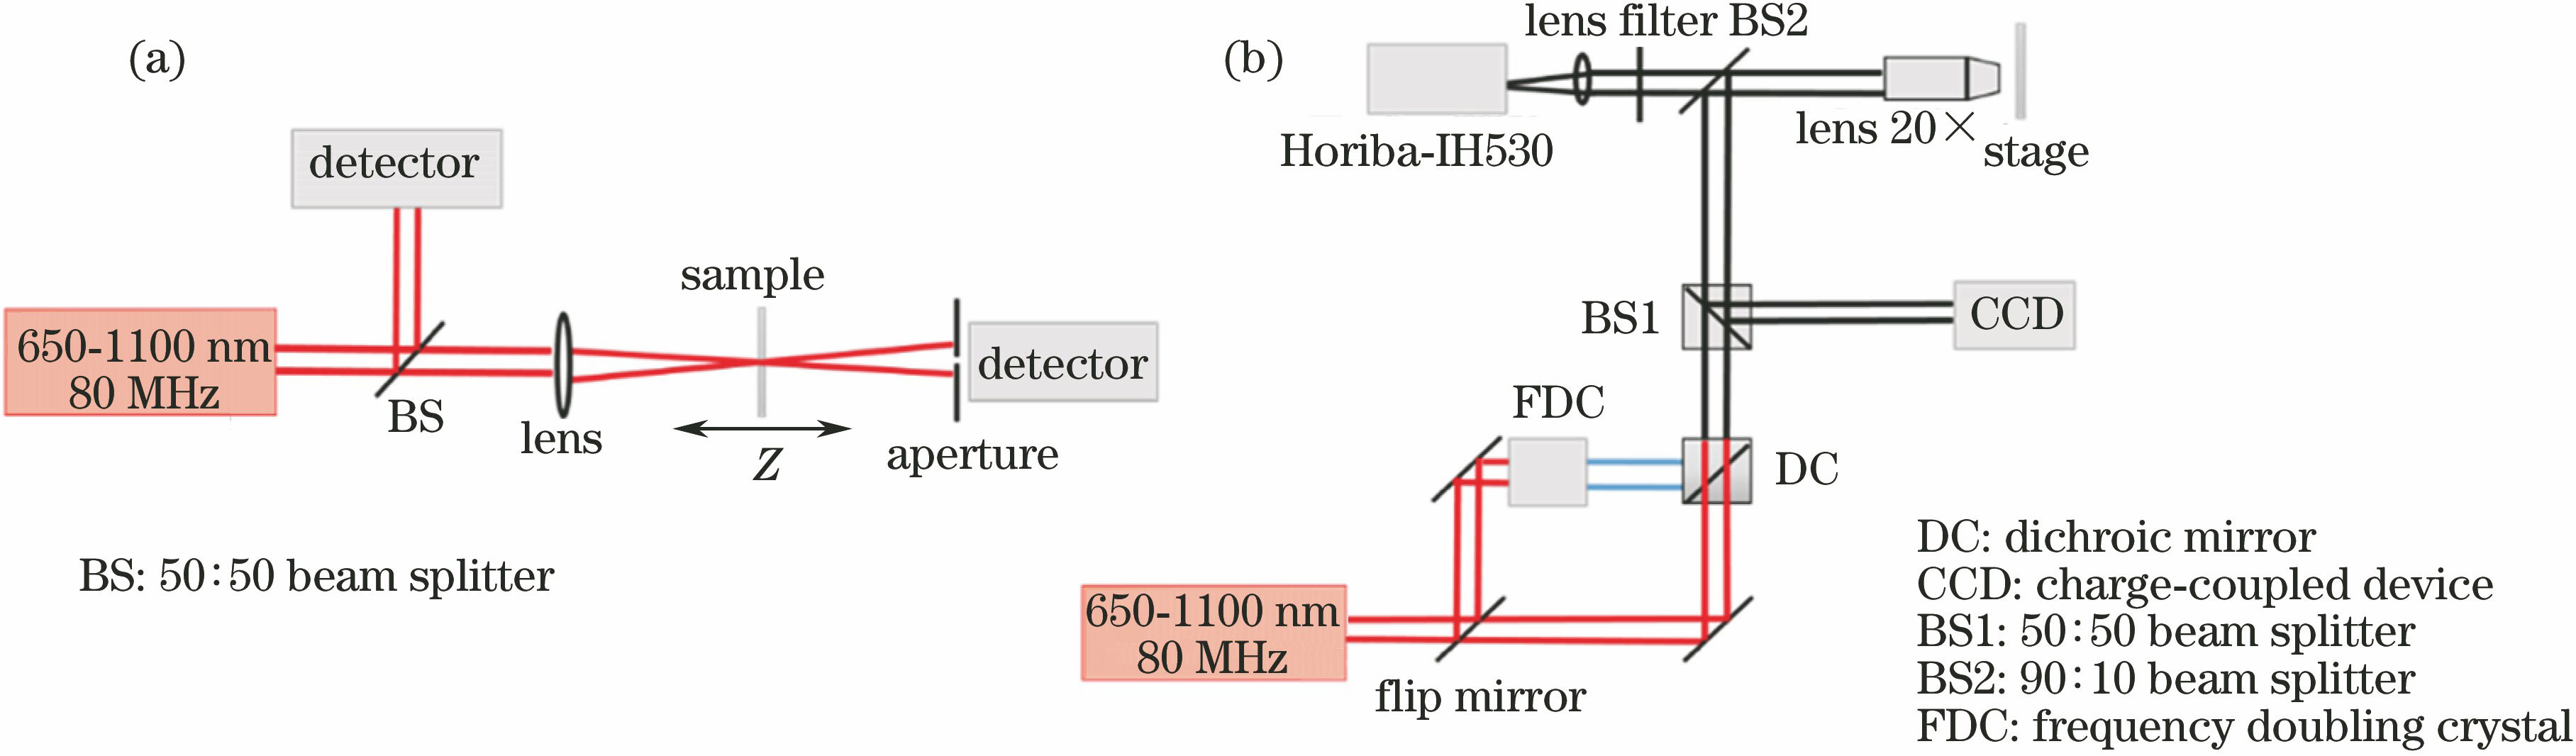 Optical paths. (a) Optical path for Z-scan; (b) optical path for detection of fluorescence spectrum